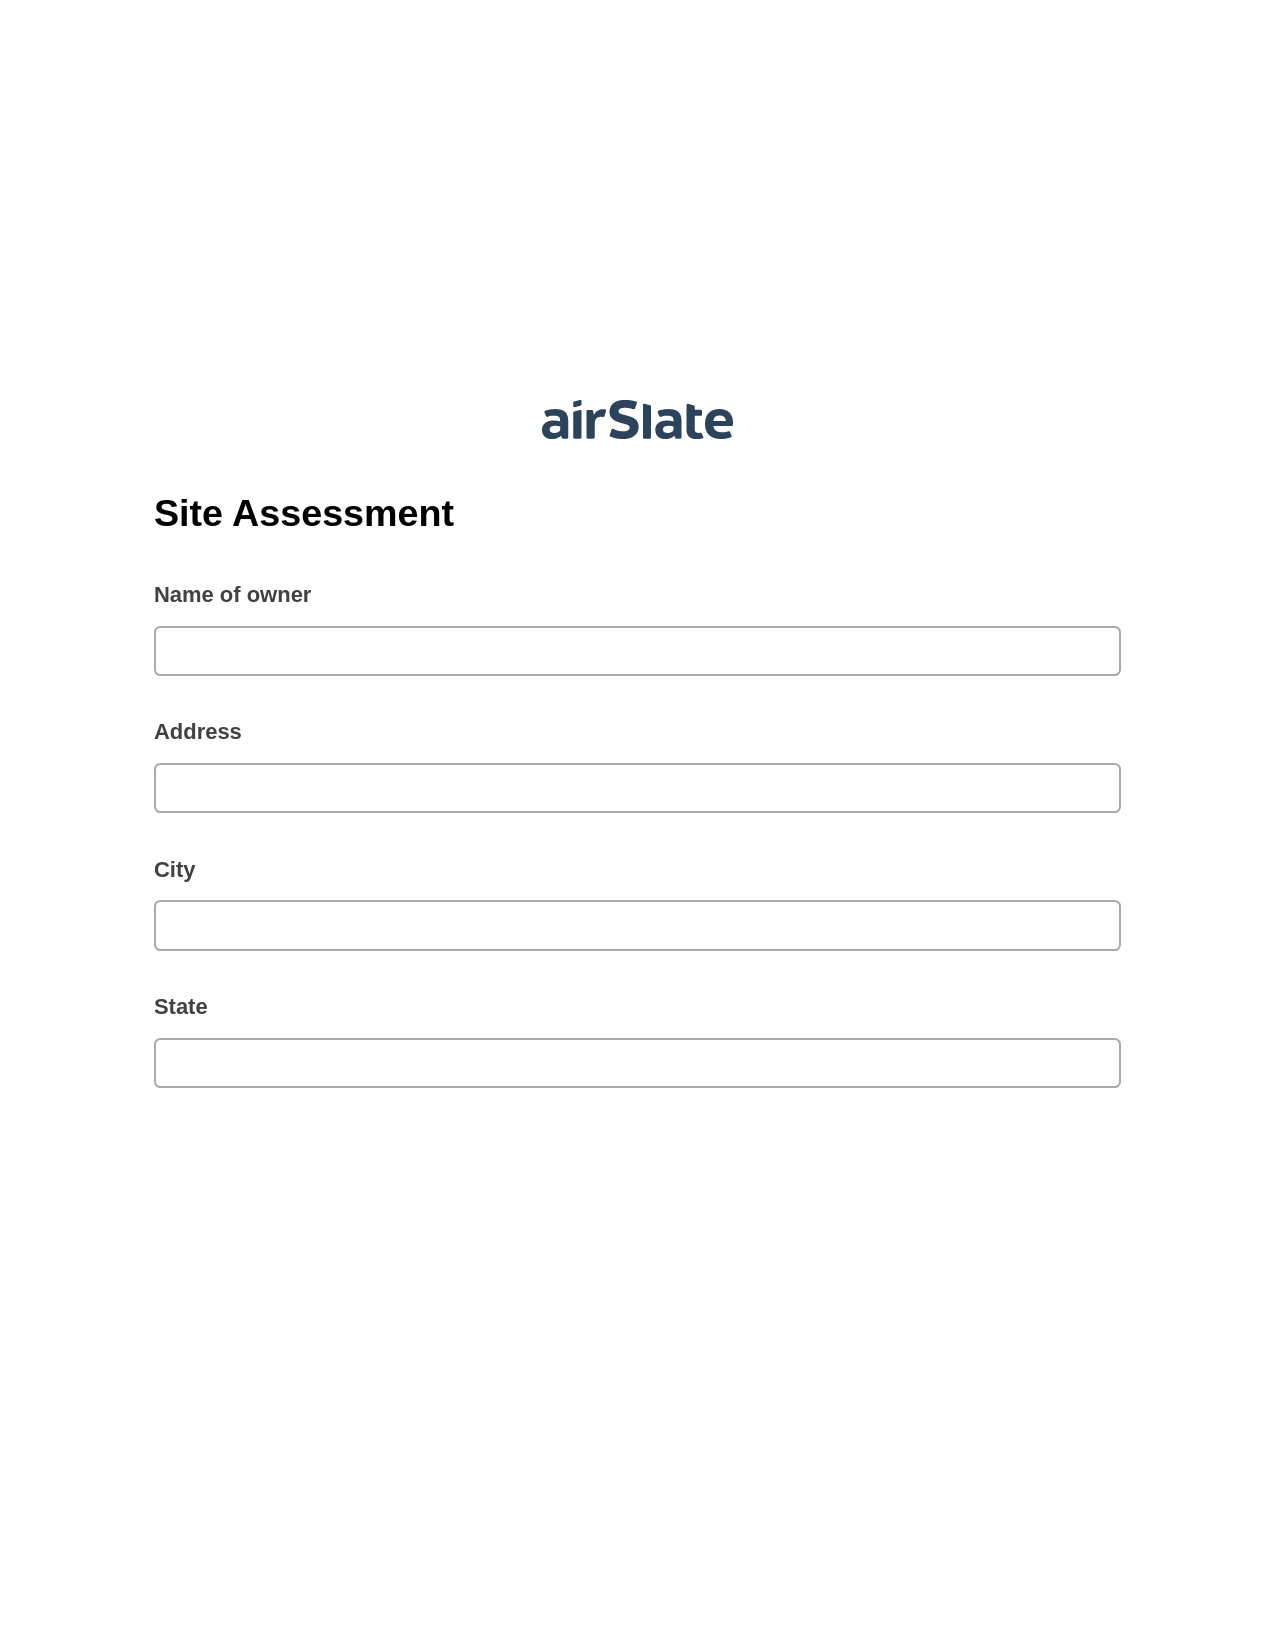 Site Assessment Pre-fill from another Slate Bot, Create NetSuite Records Bot, Export to Google Sheet Bot